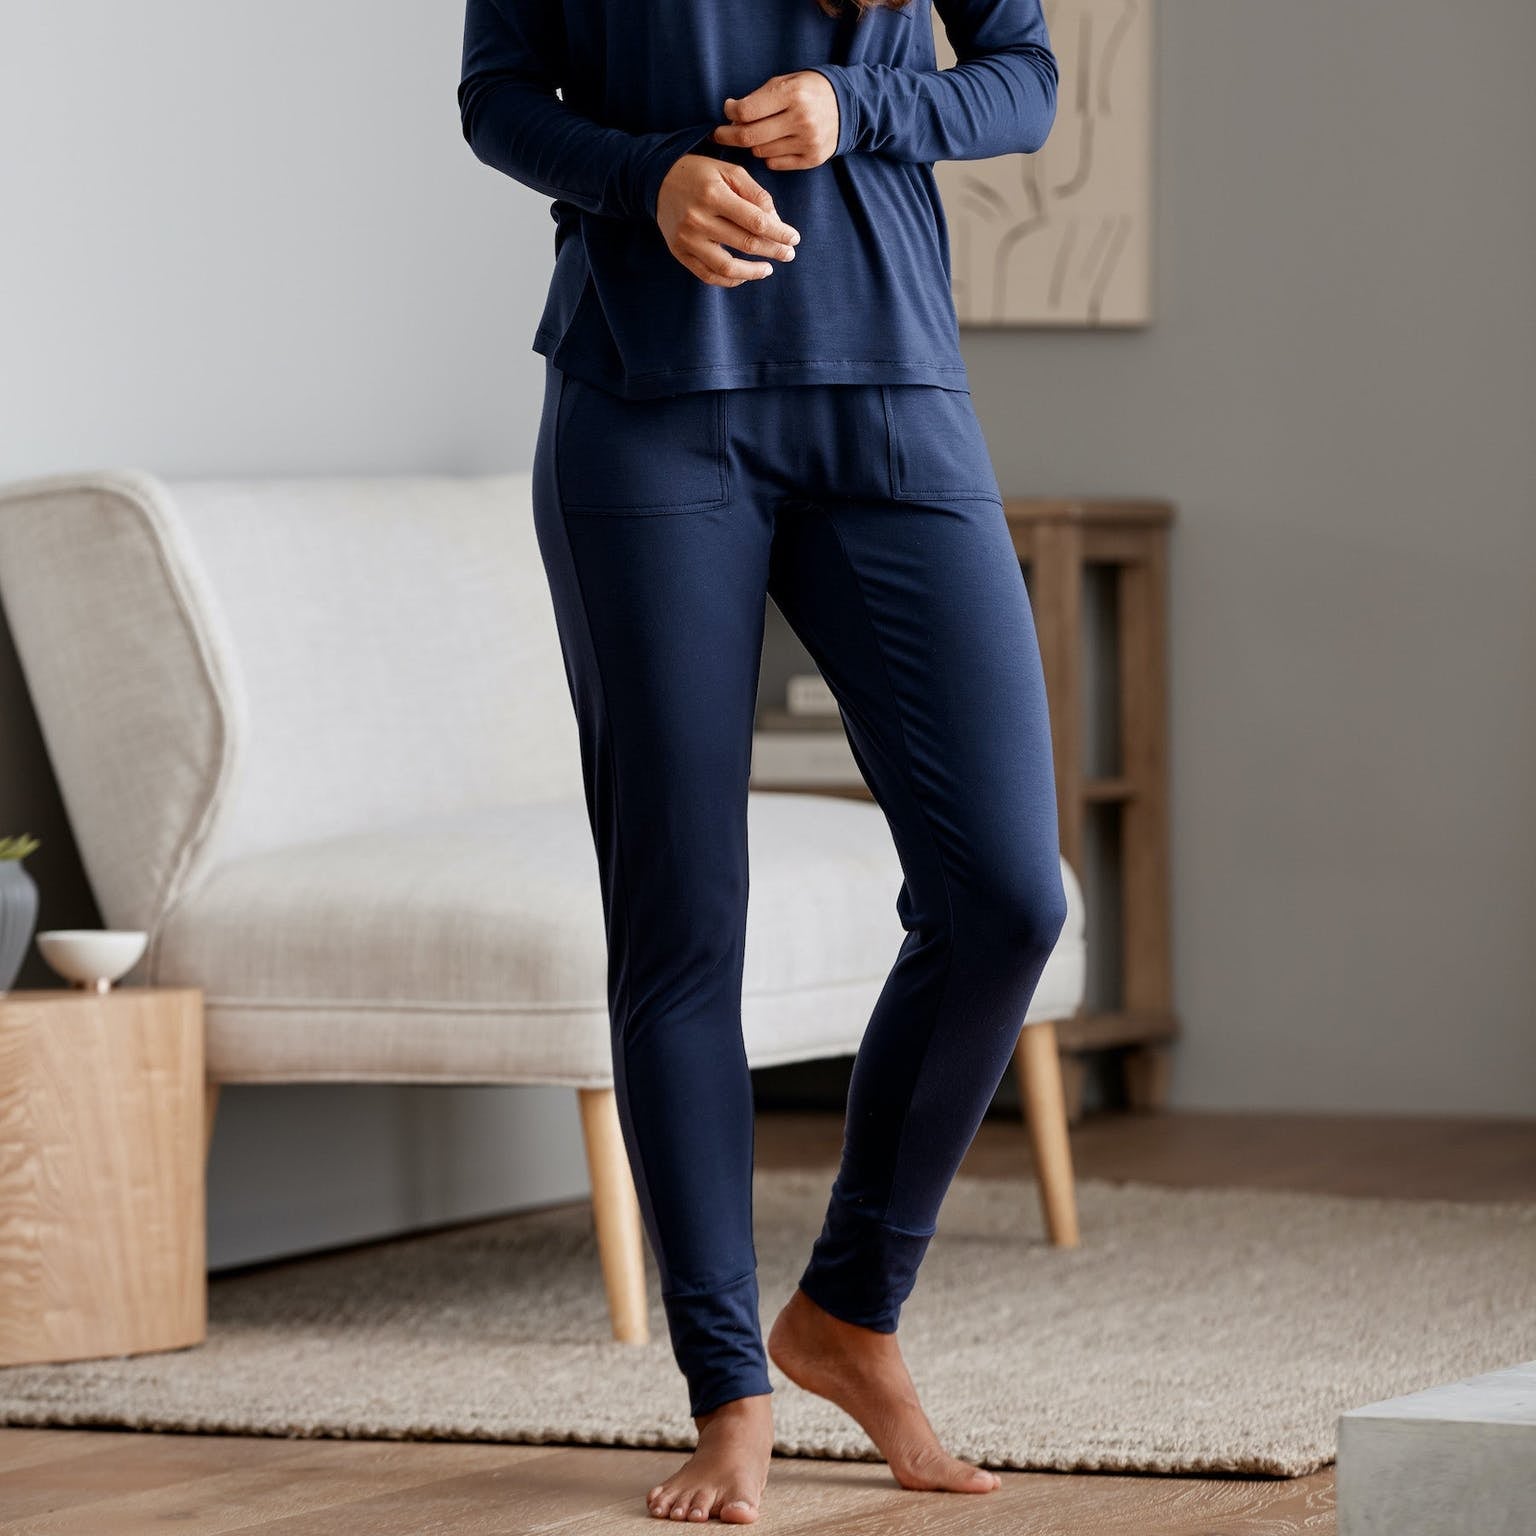 Trade your tired pajamas for stylish loungewear from Old Navy, Madewell and  more